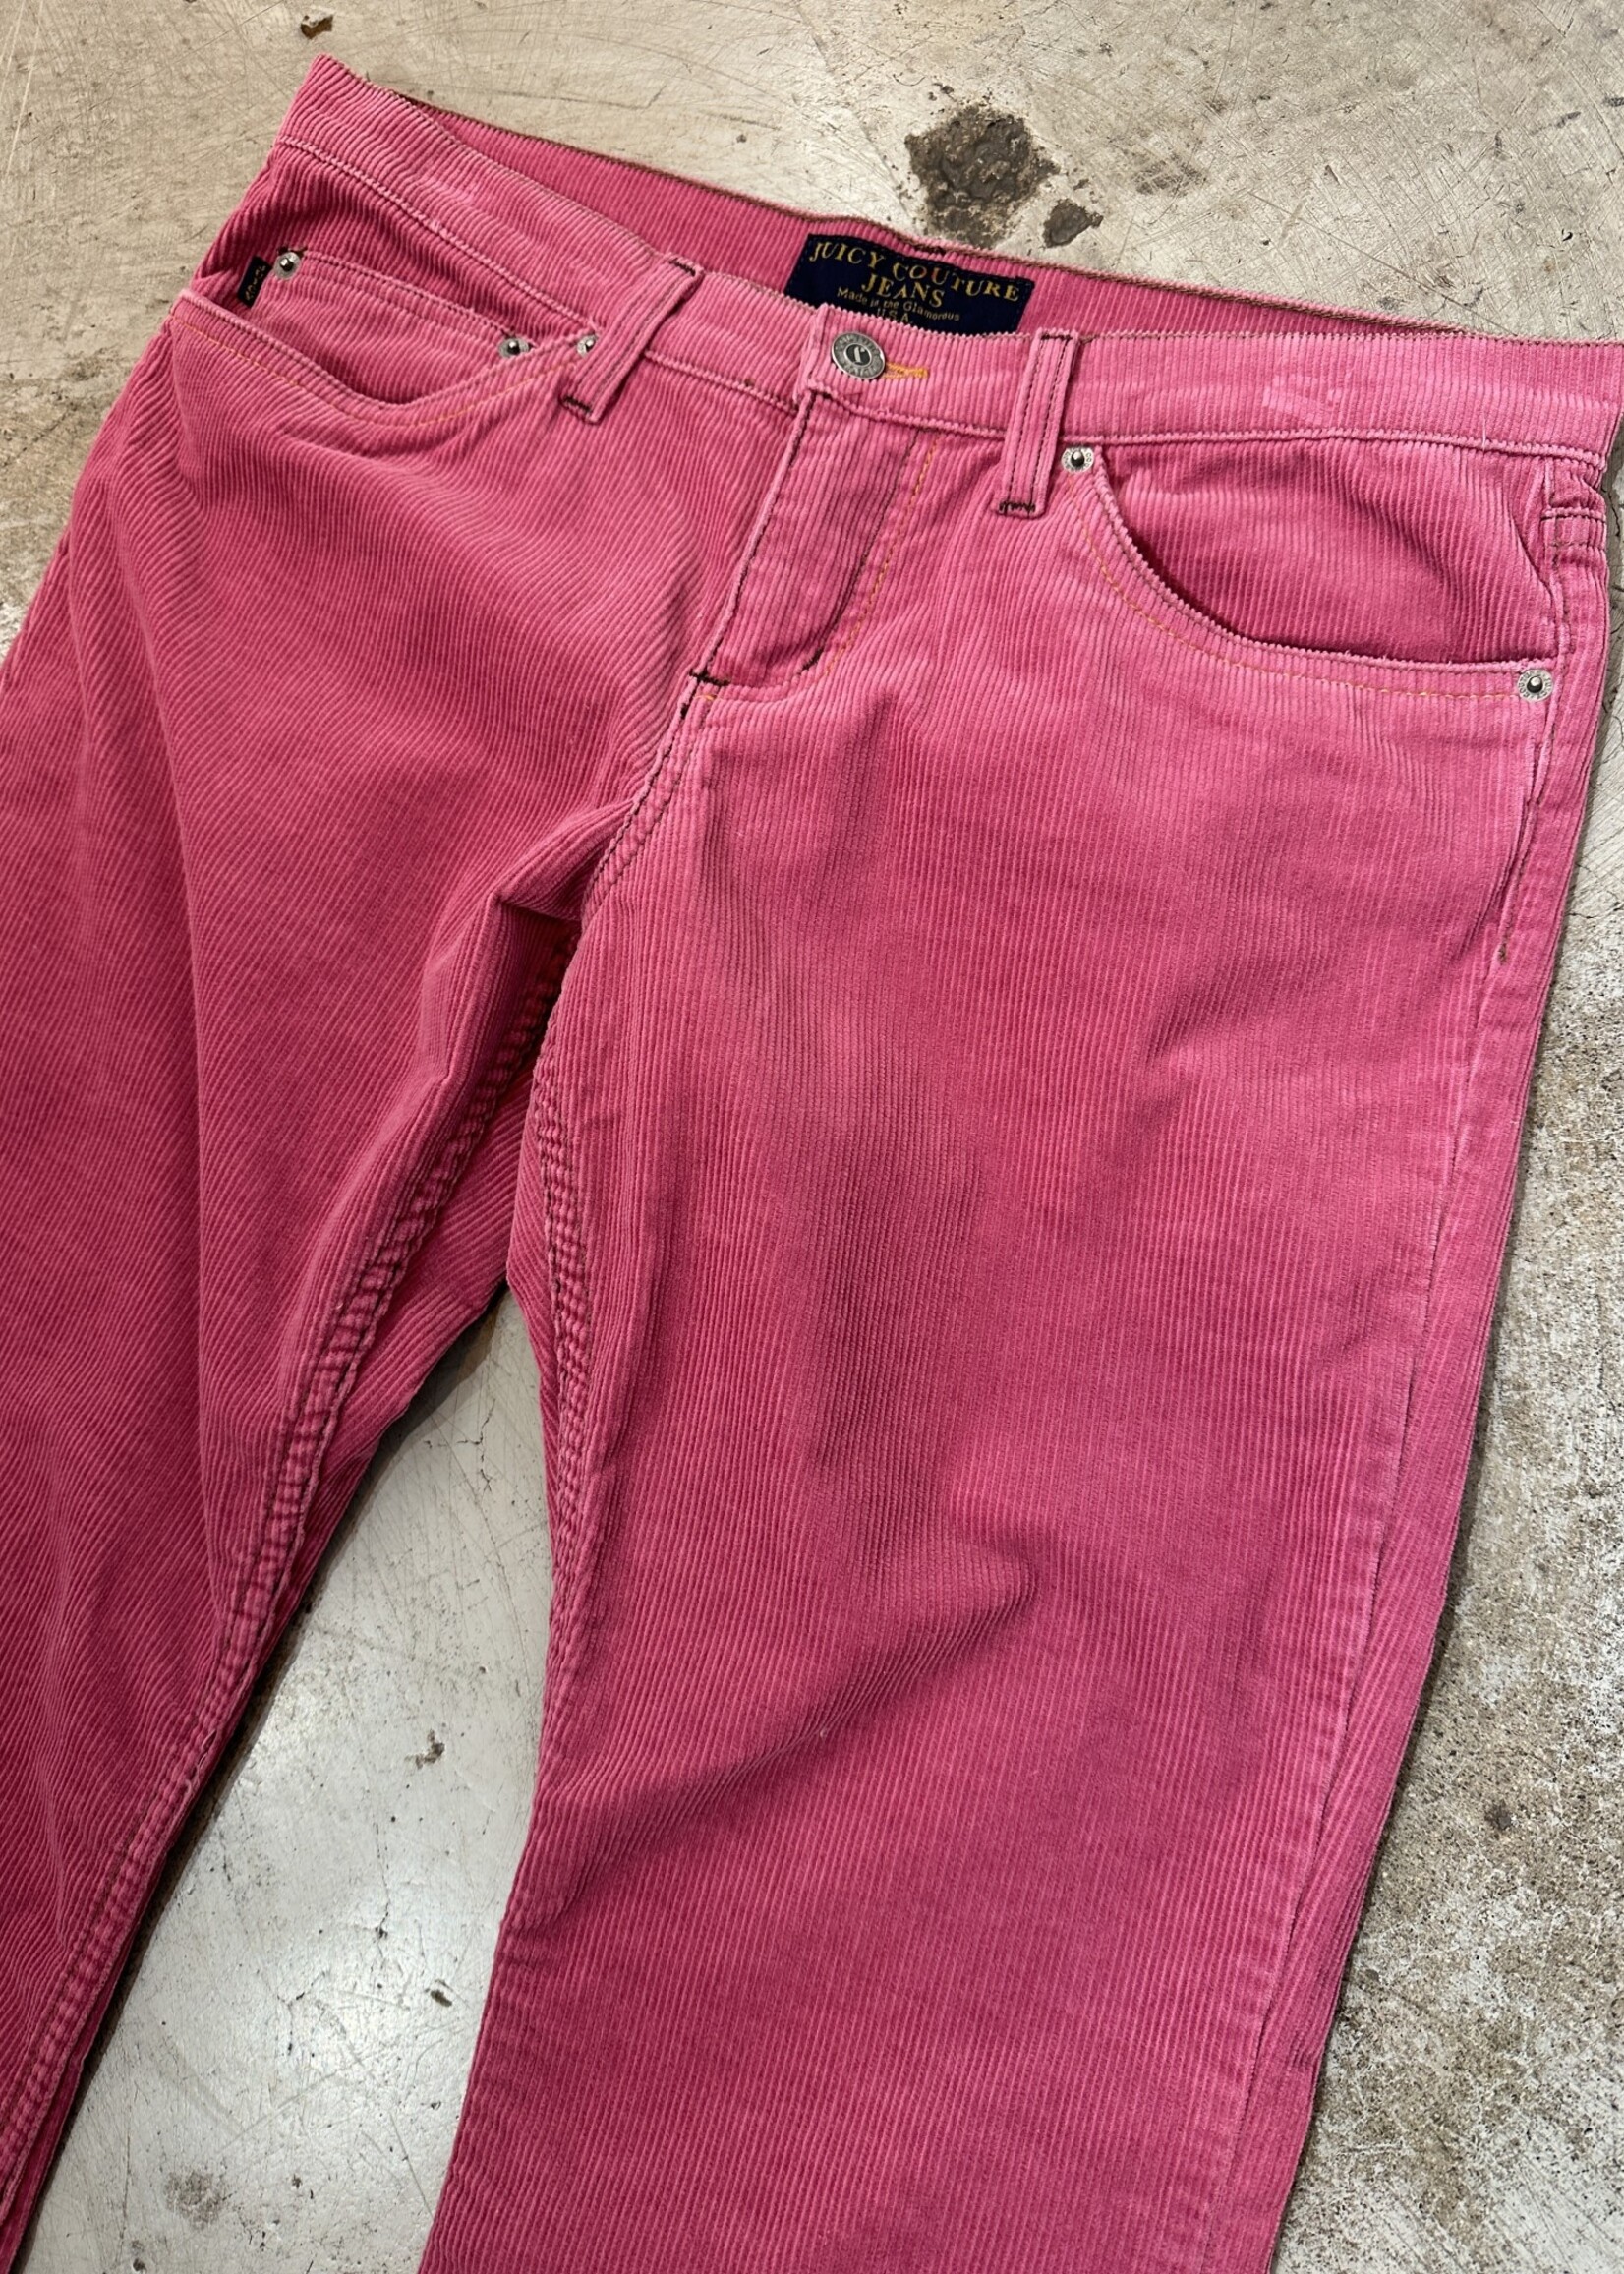 Juicy Couture Low Rise Pink Corduroy Flares 30